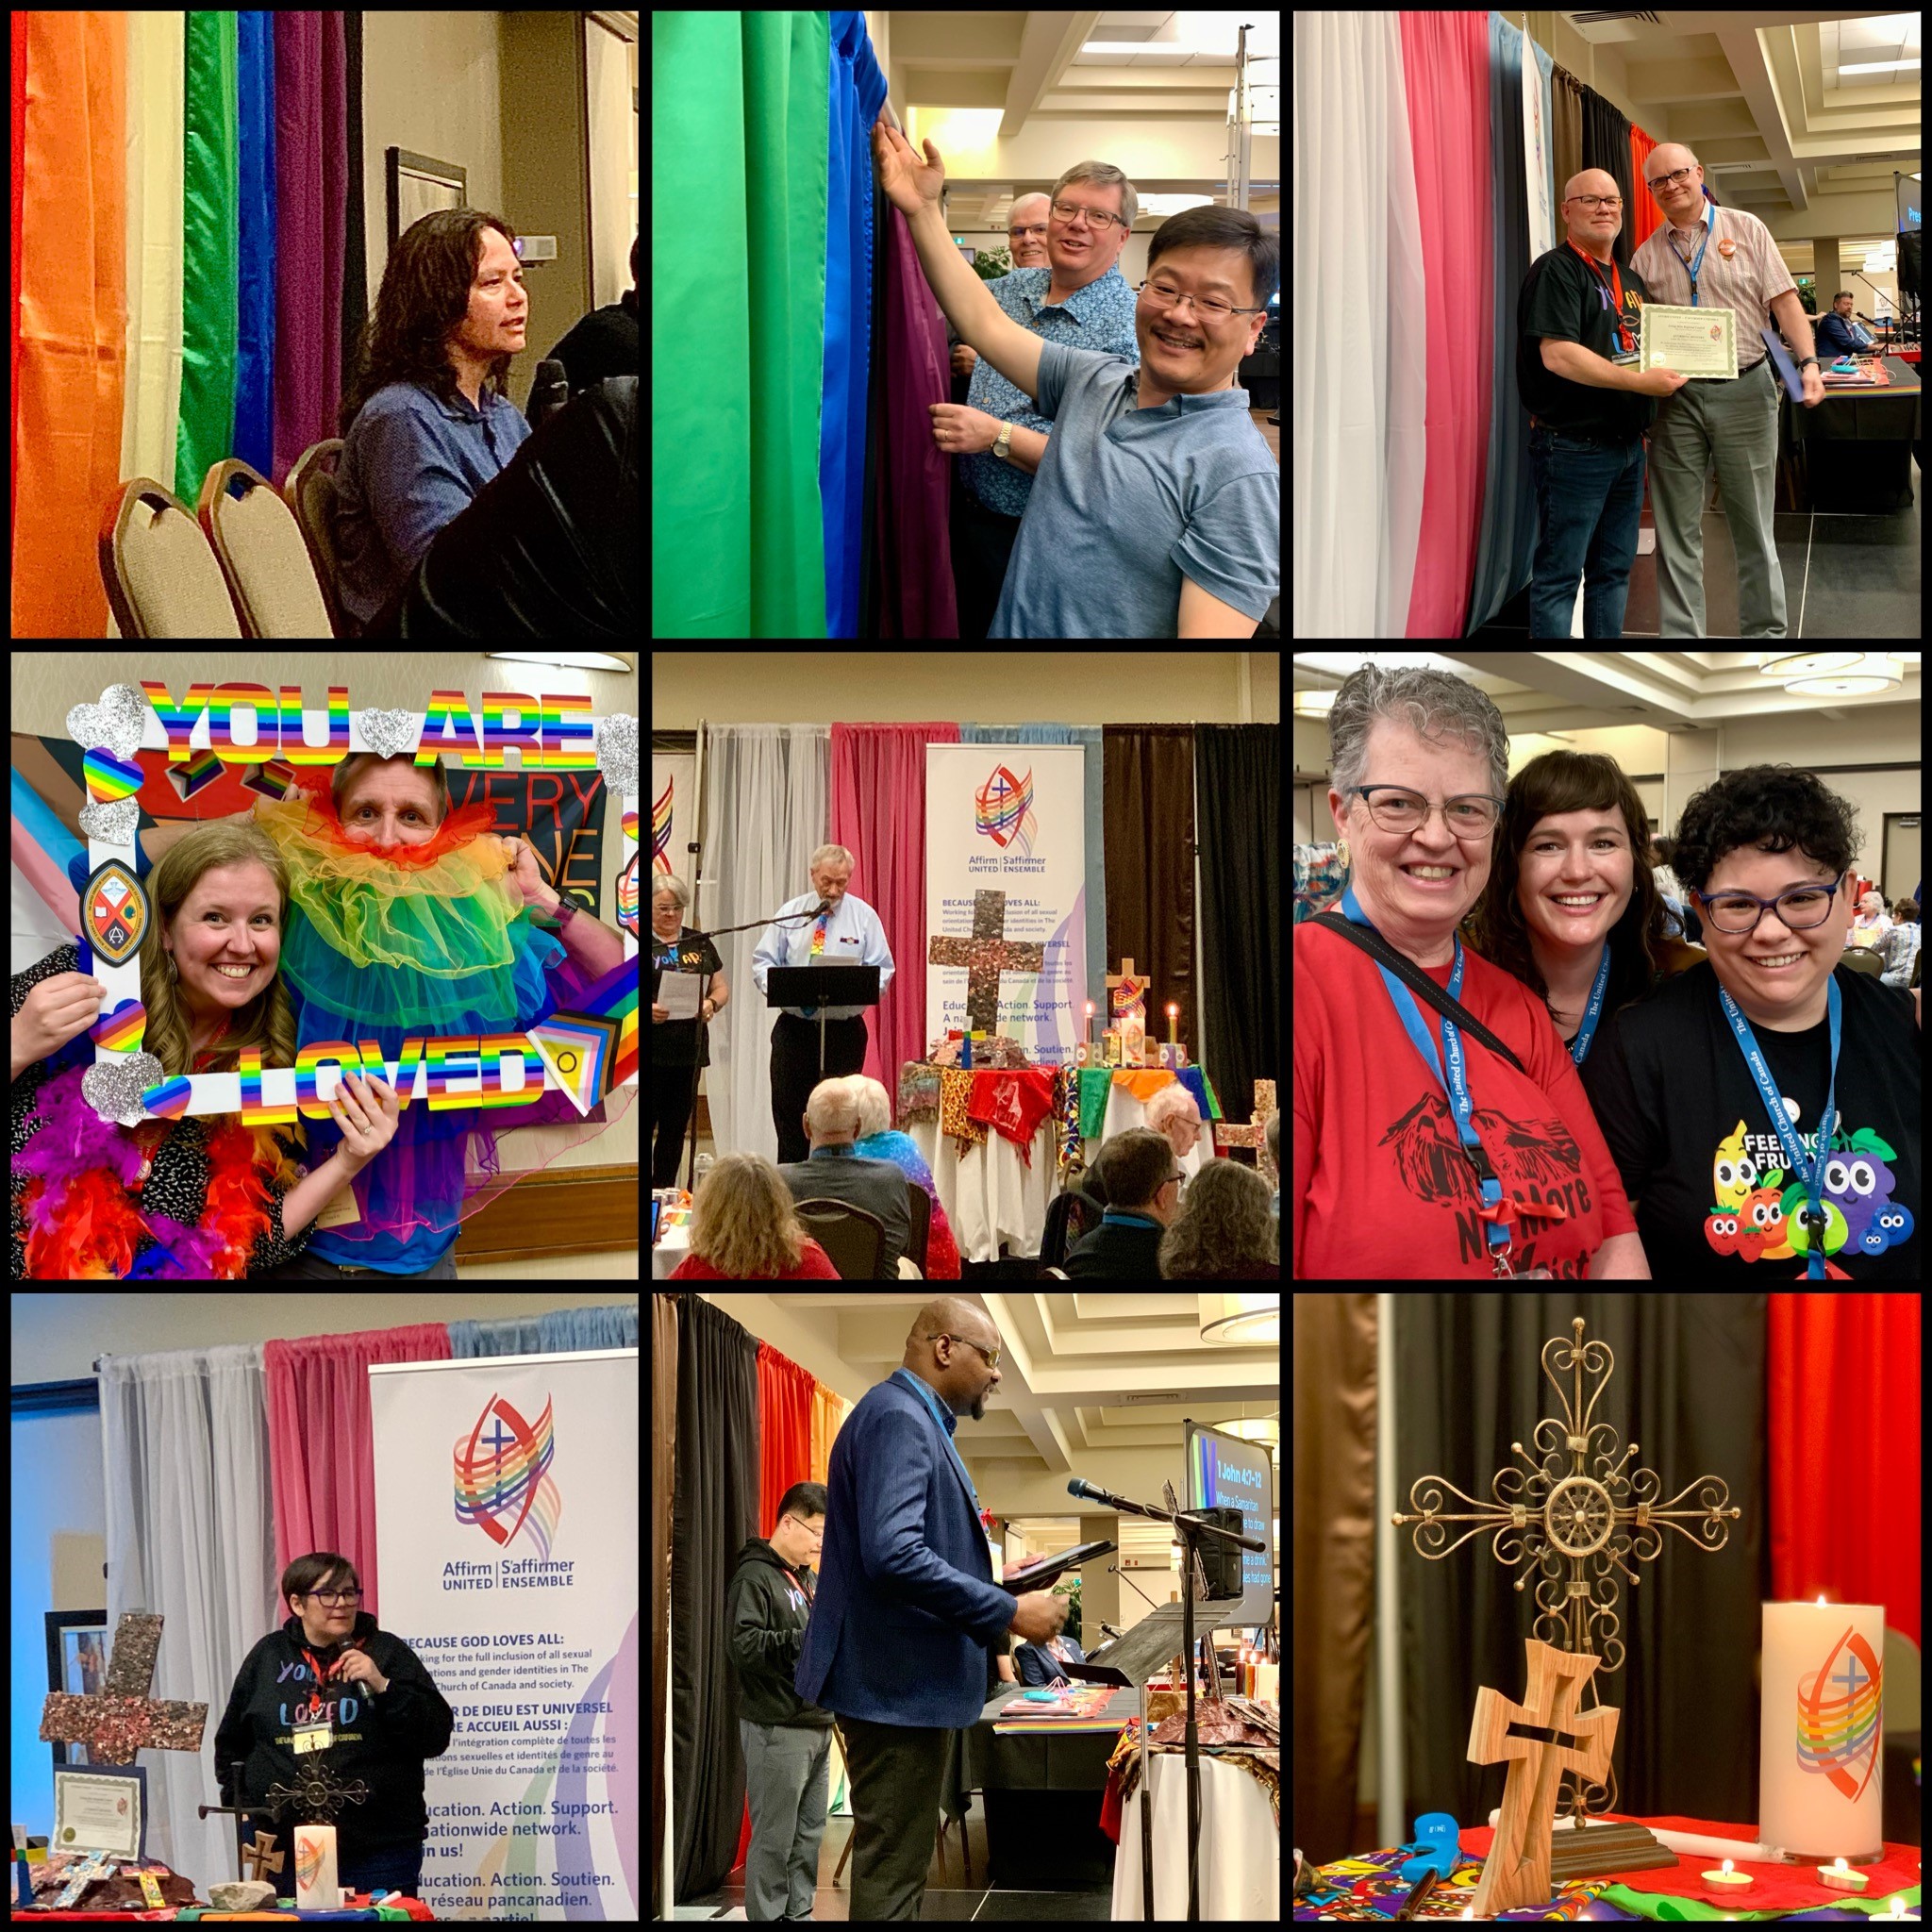 Collage of nine photos showing diverse people at the Affirming celebration. 